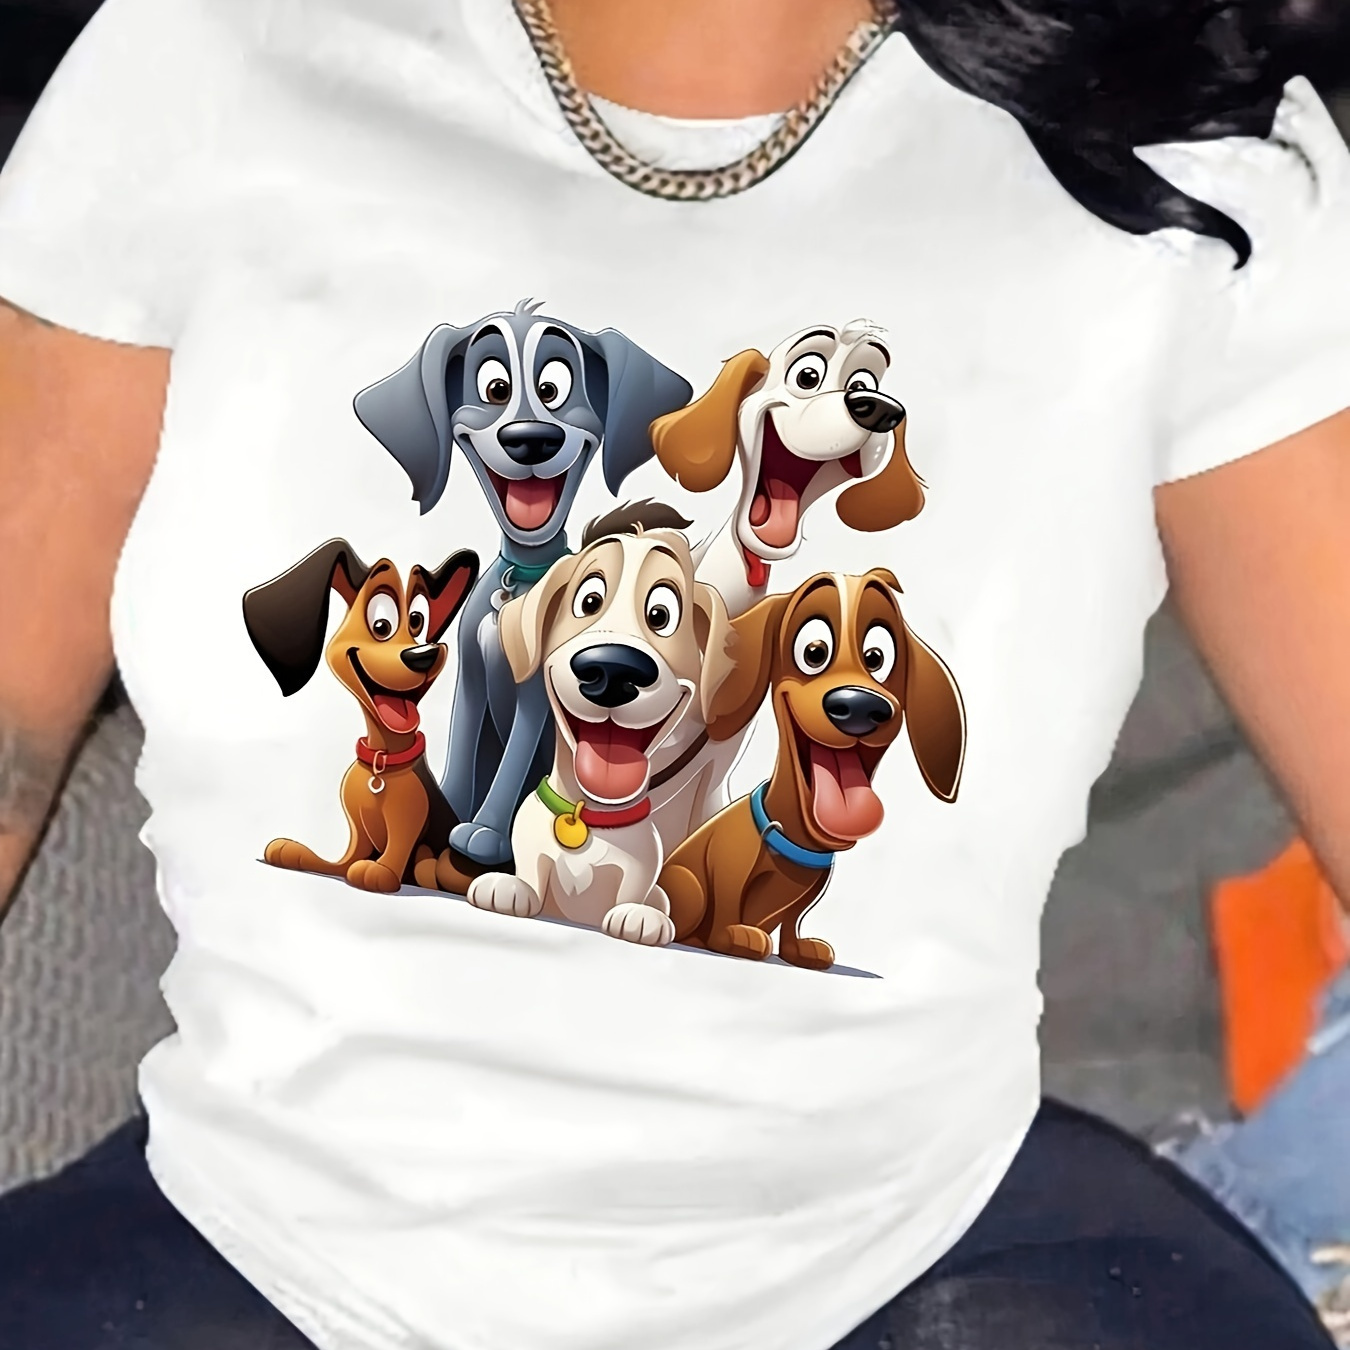 

Puppy Print Crew Neck T-shirt, Casual Short Sleeve T-shirt For Spring & Summer, Women's Clothing